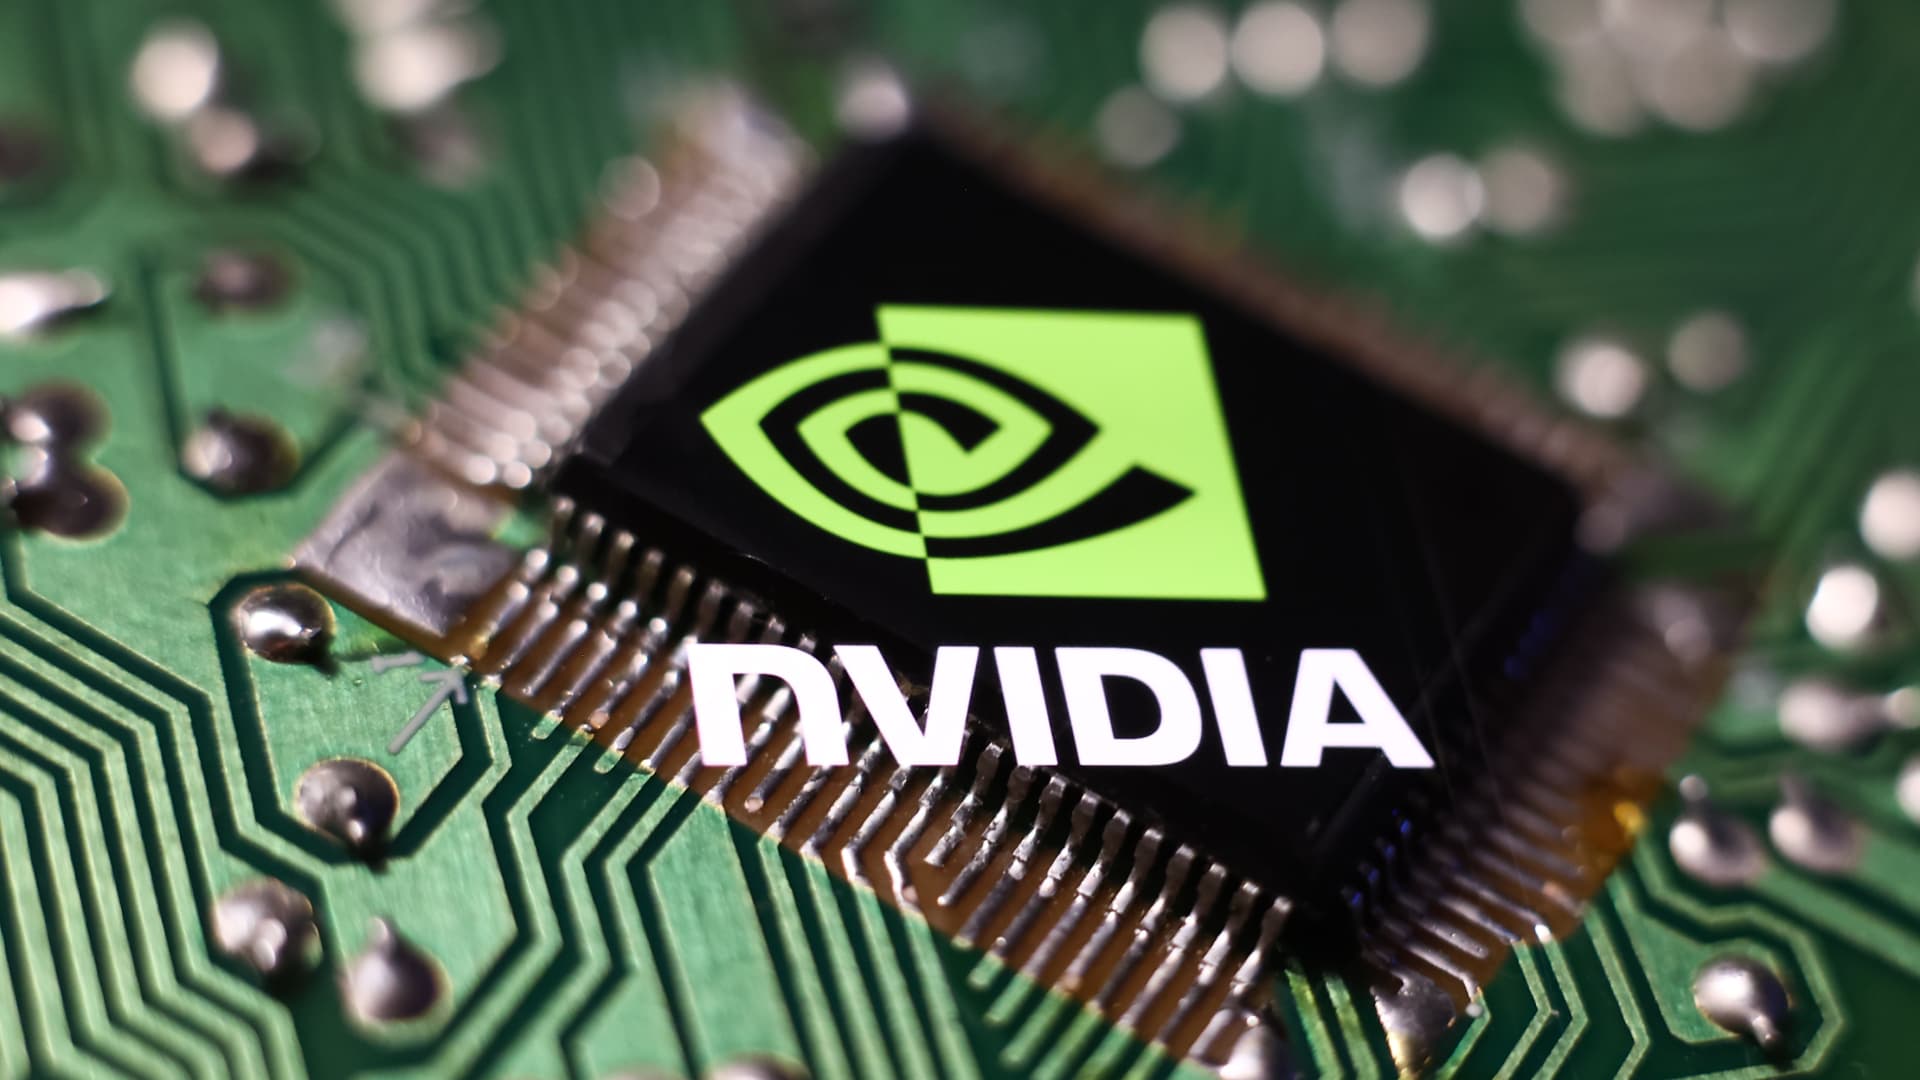 A microchip and the Nvidia logo are displayed on a phone screen in this photo taken in Krakow, Poland, on April 10, 2023.